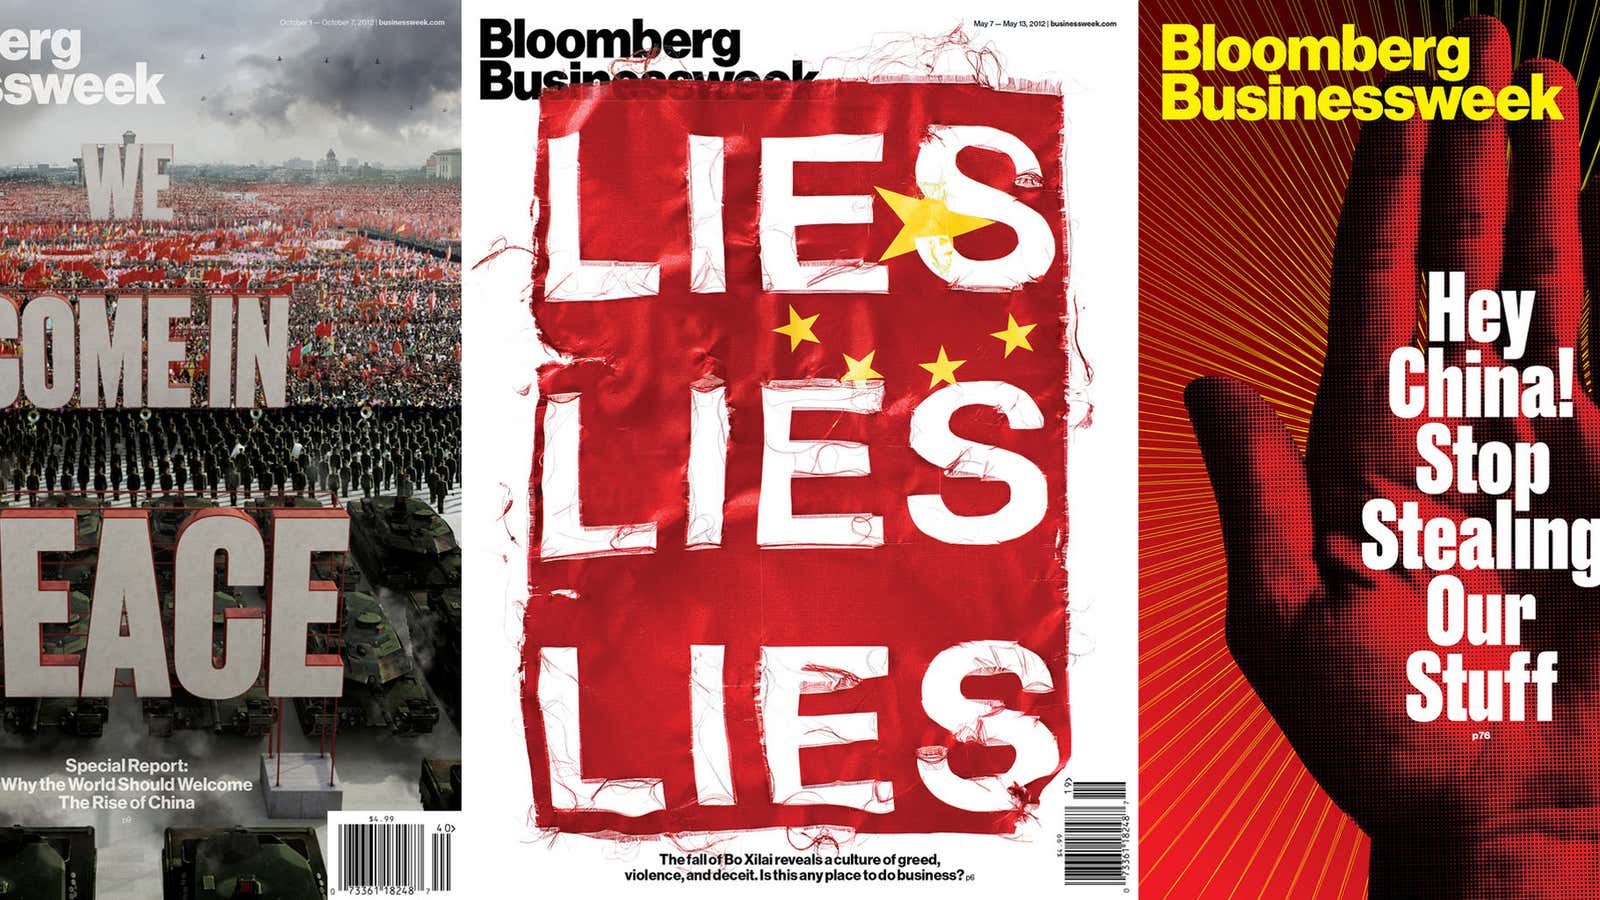 US-China relations as seen through Businessweek covers from the past six months